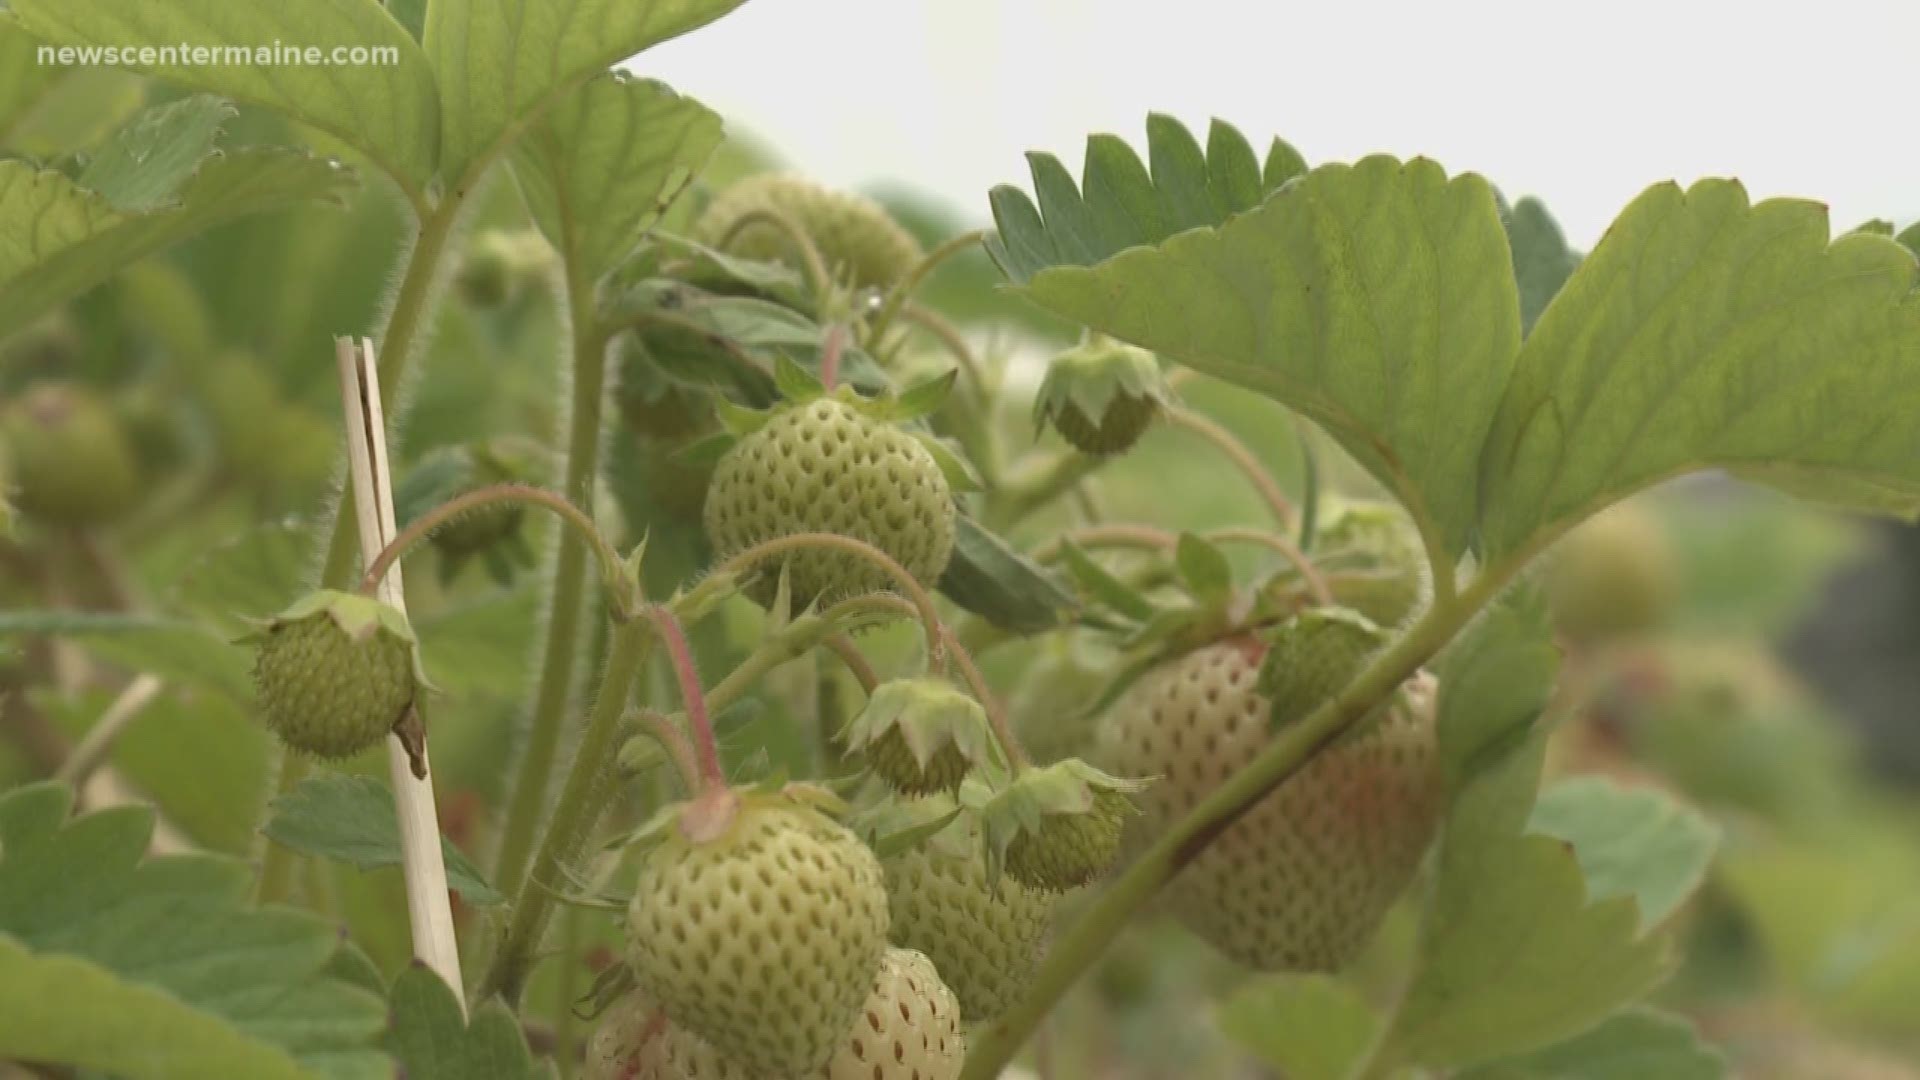 Bad weather leads to late start for strawberry season.